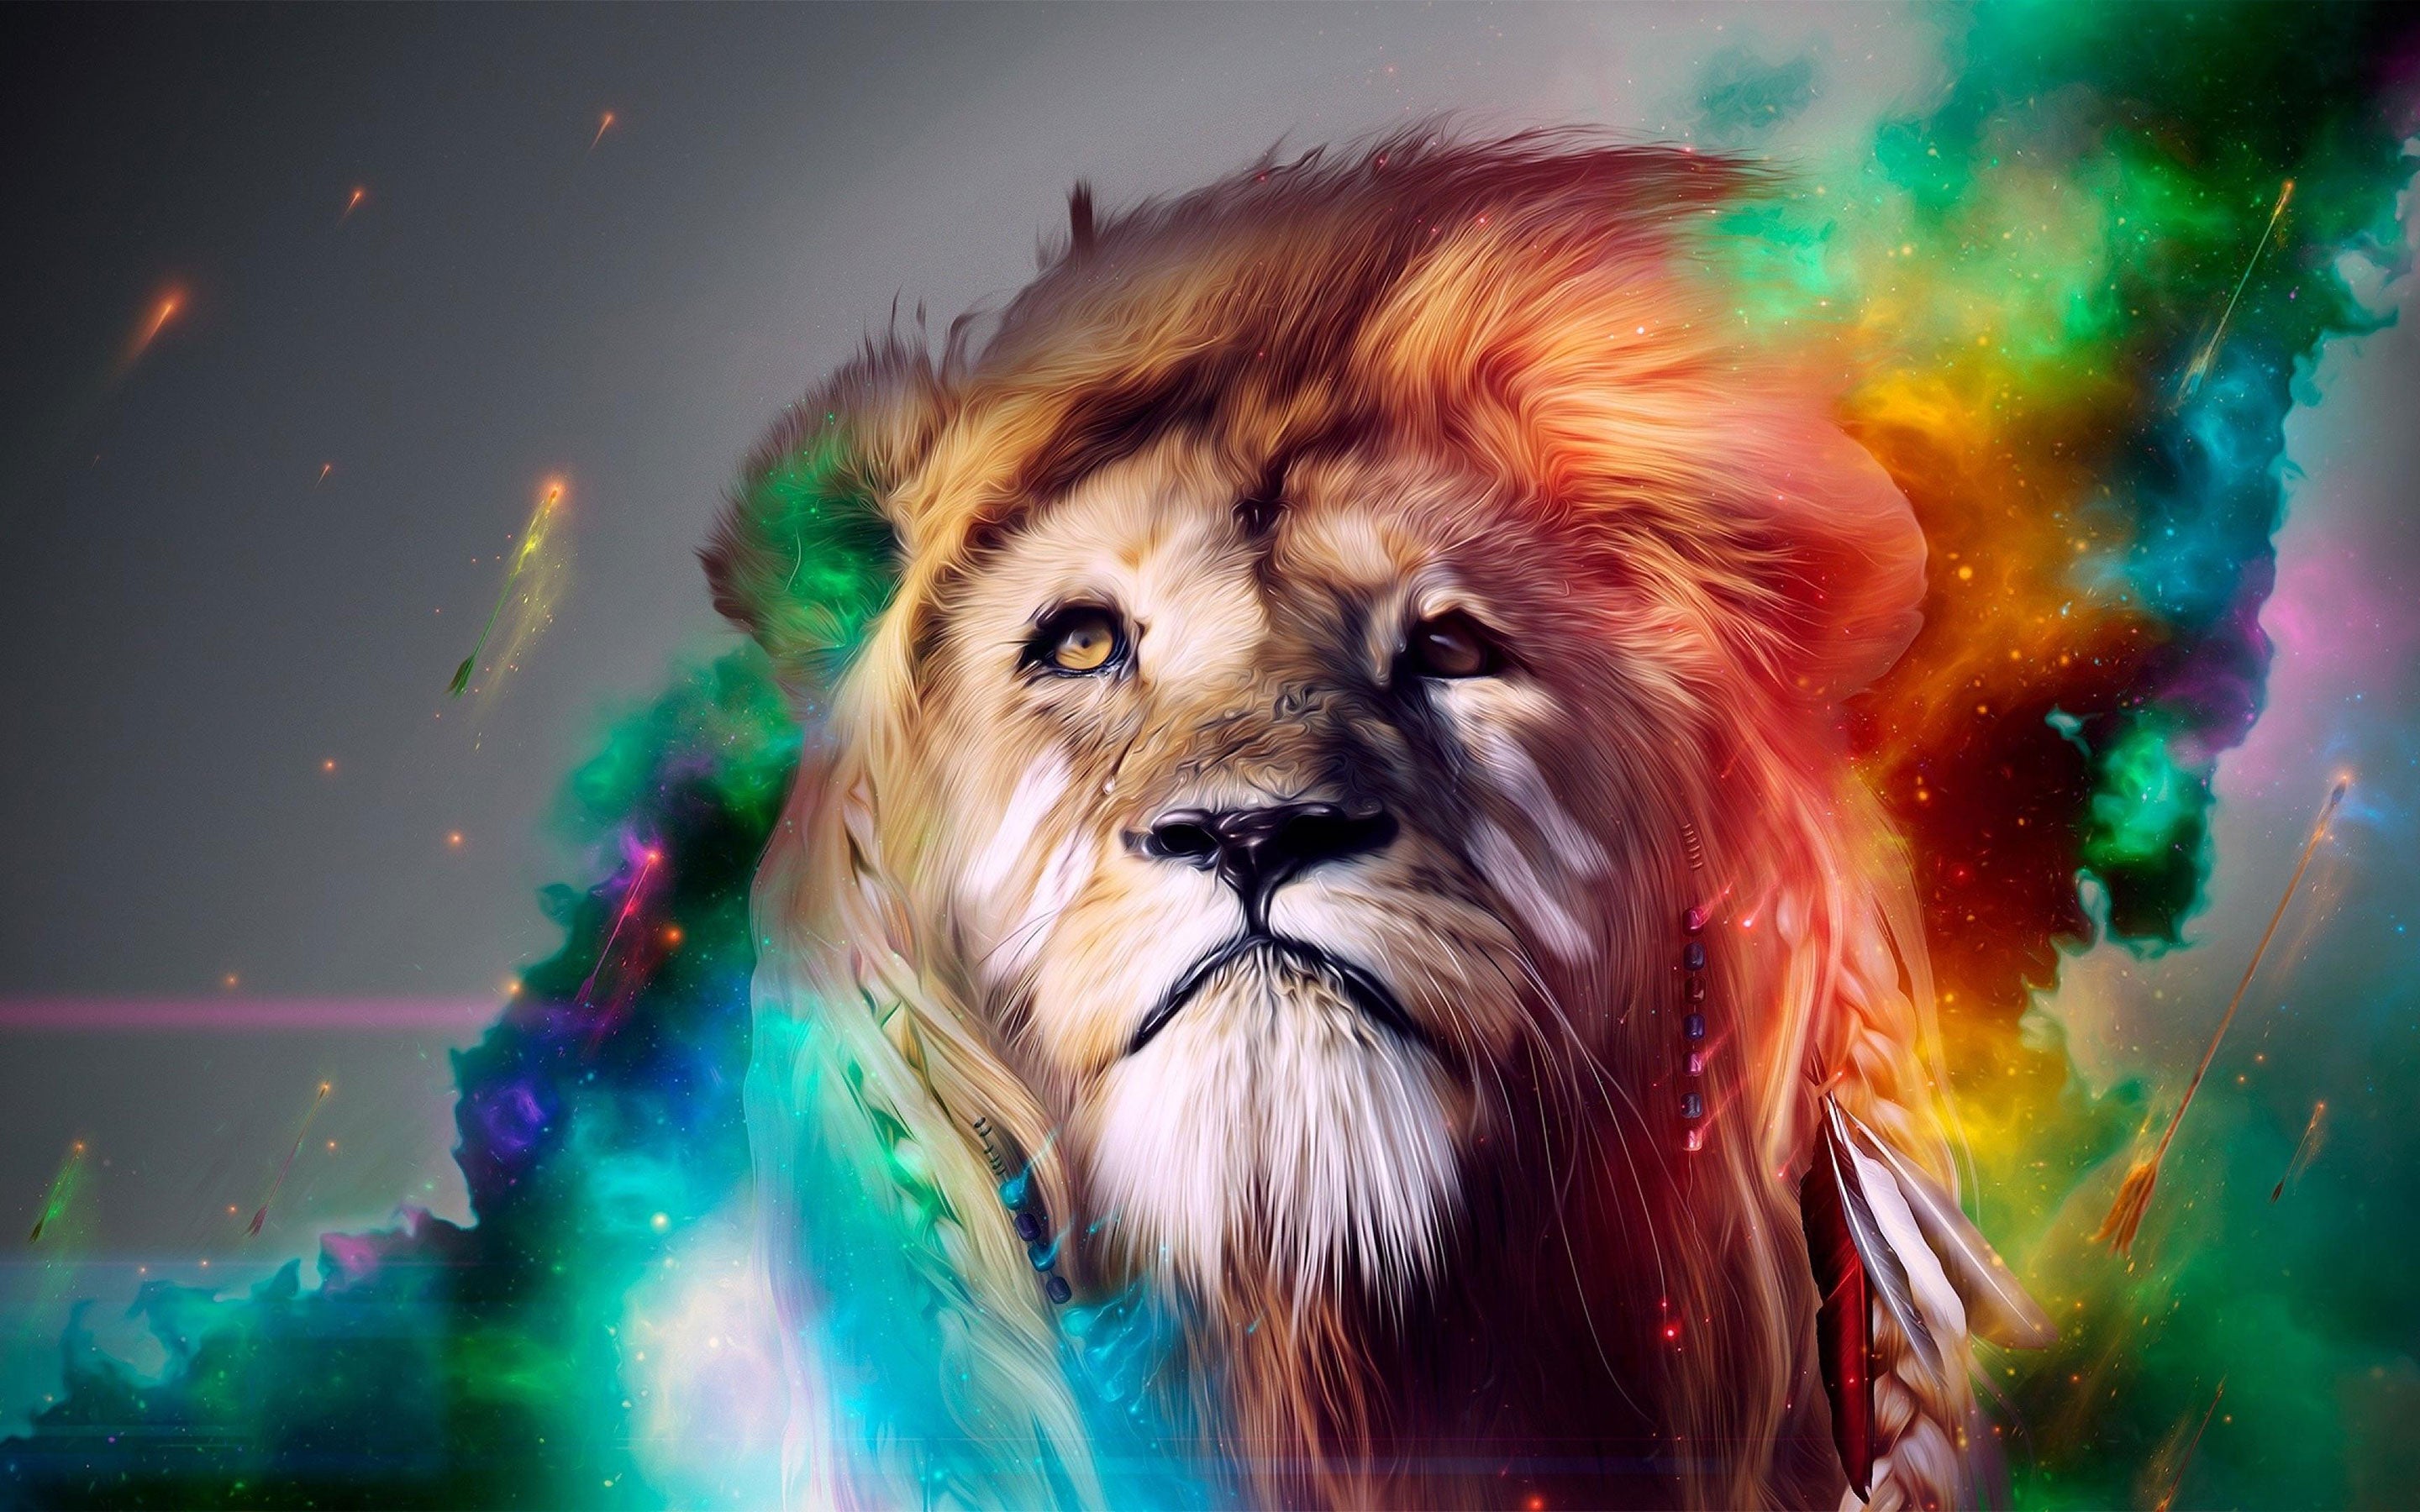 A lion with a colorful mane and smoke - Lion